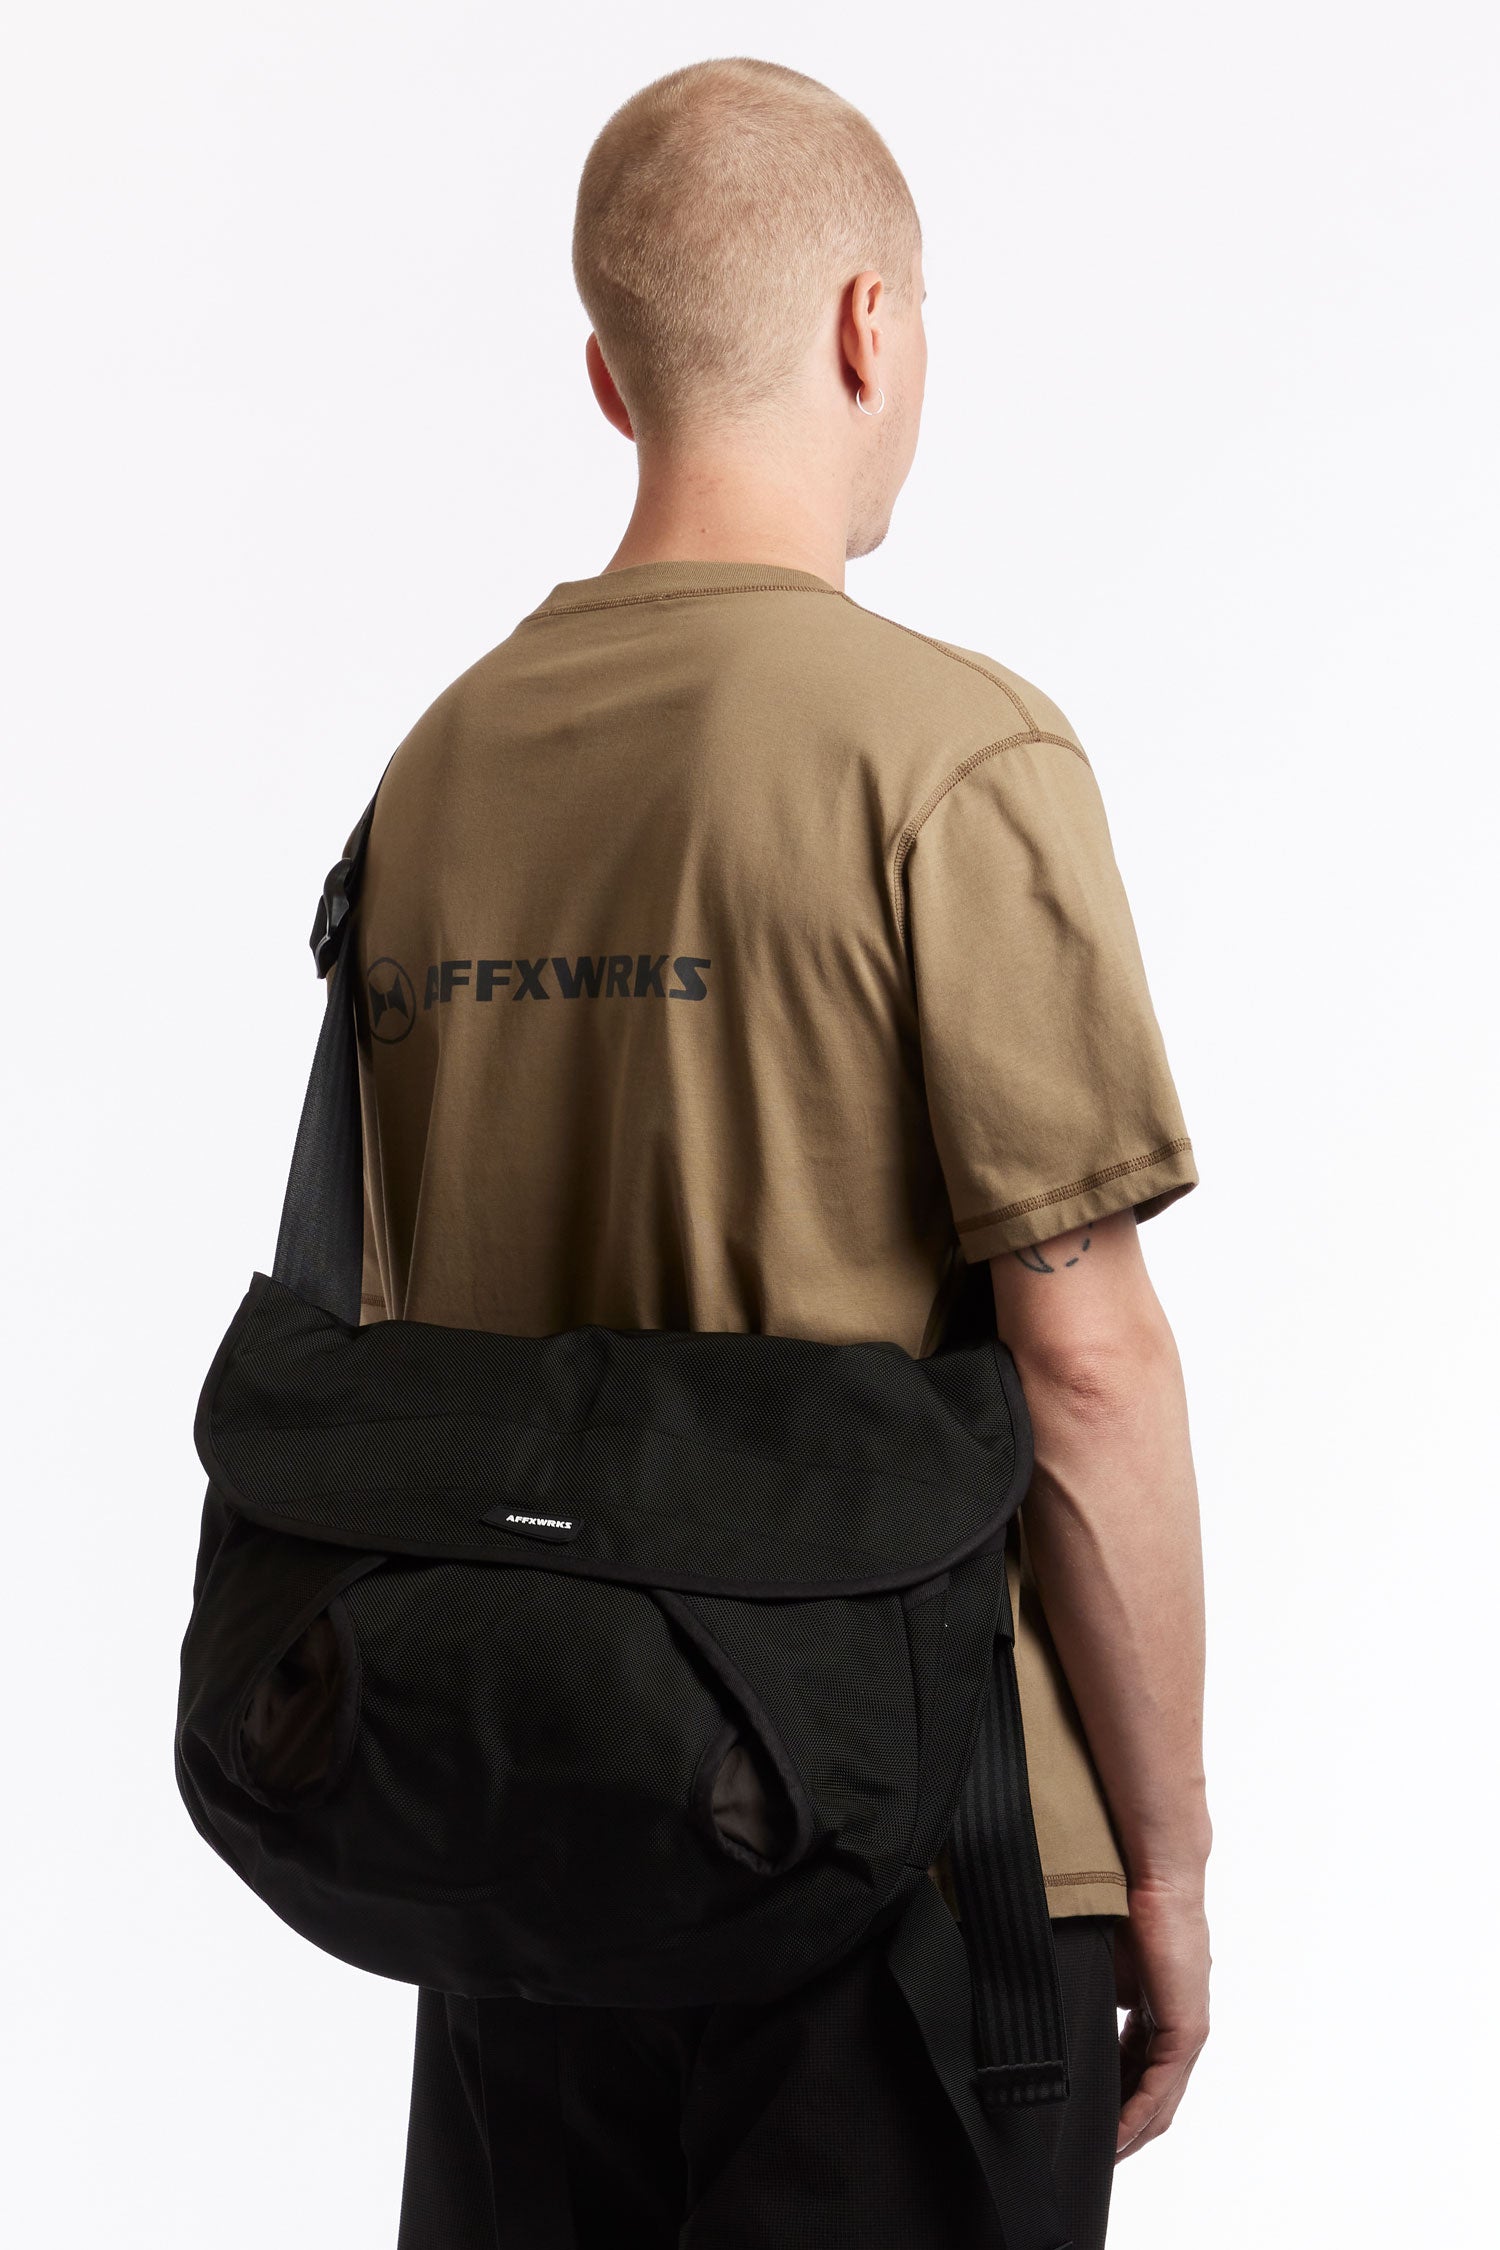 The AFFXWRKS - RABIN MESSENGER BAG  available online with global shipping, and in PAM Stores Melbourne and Sydney.